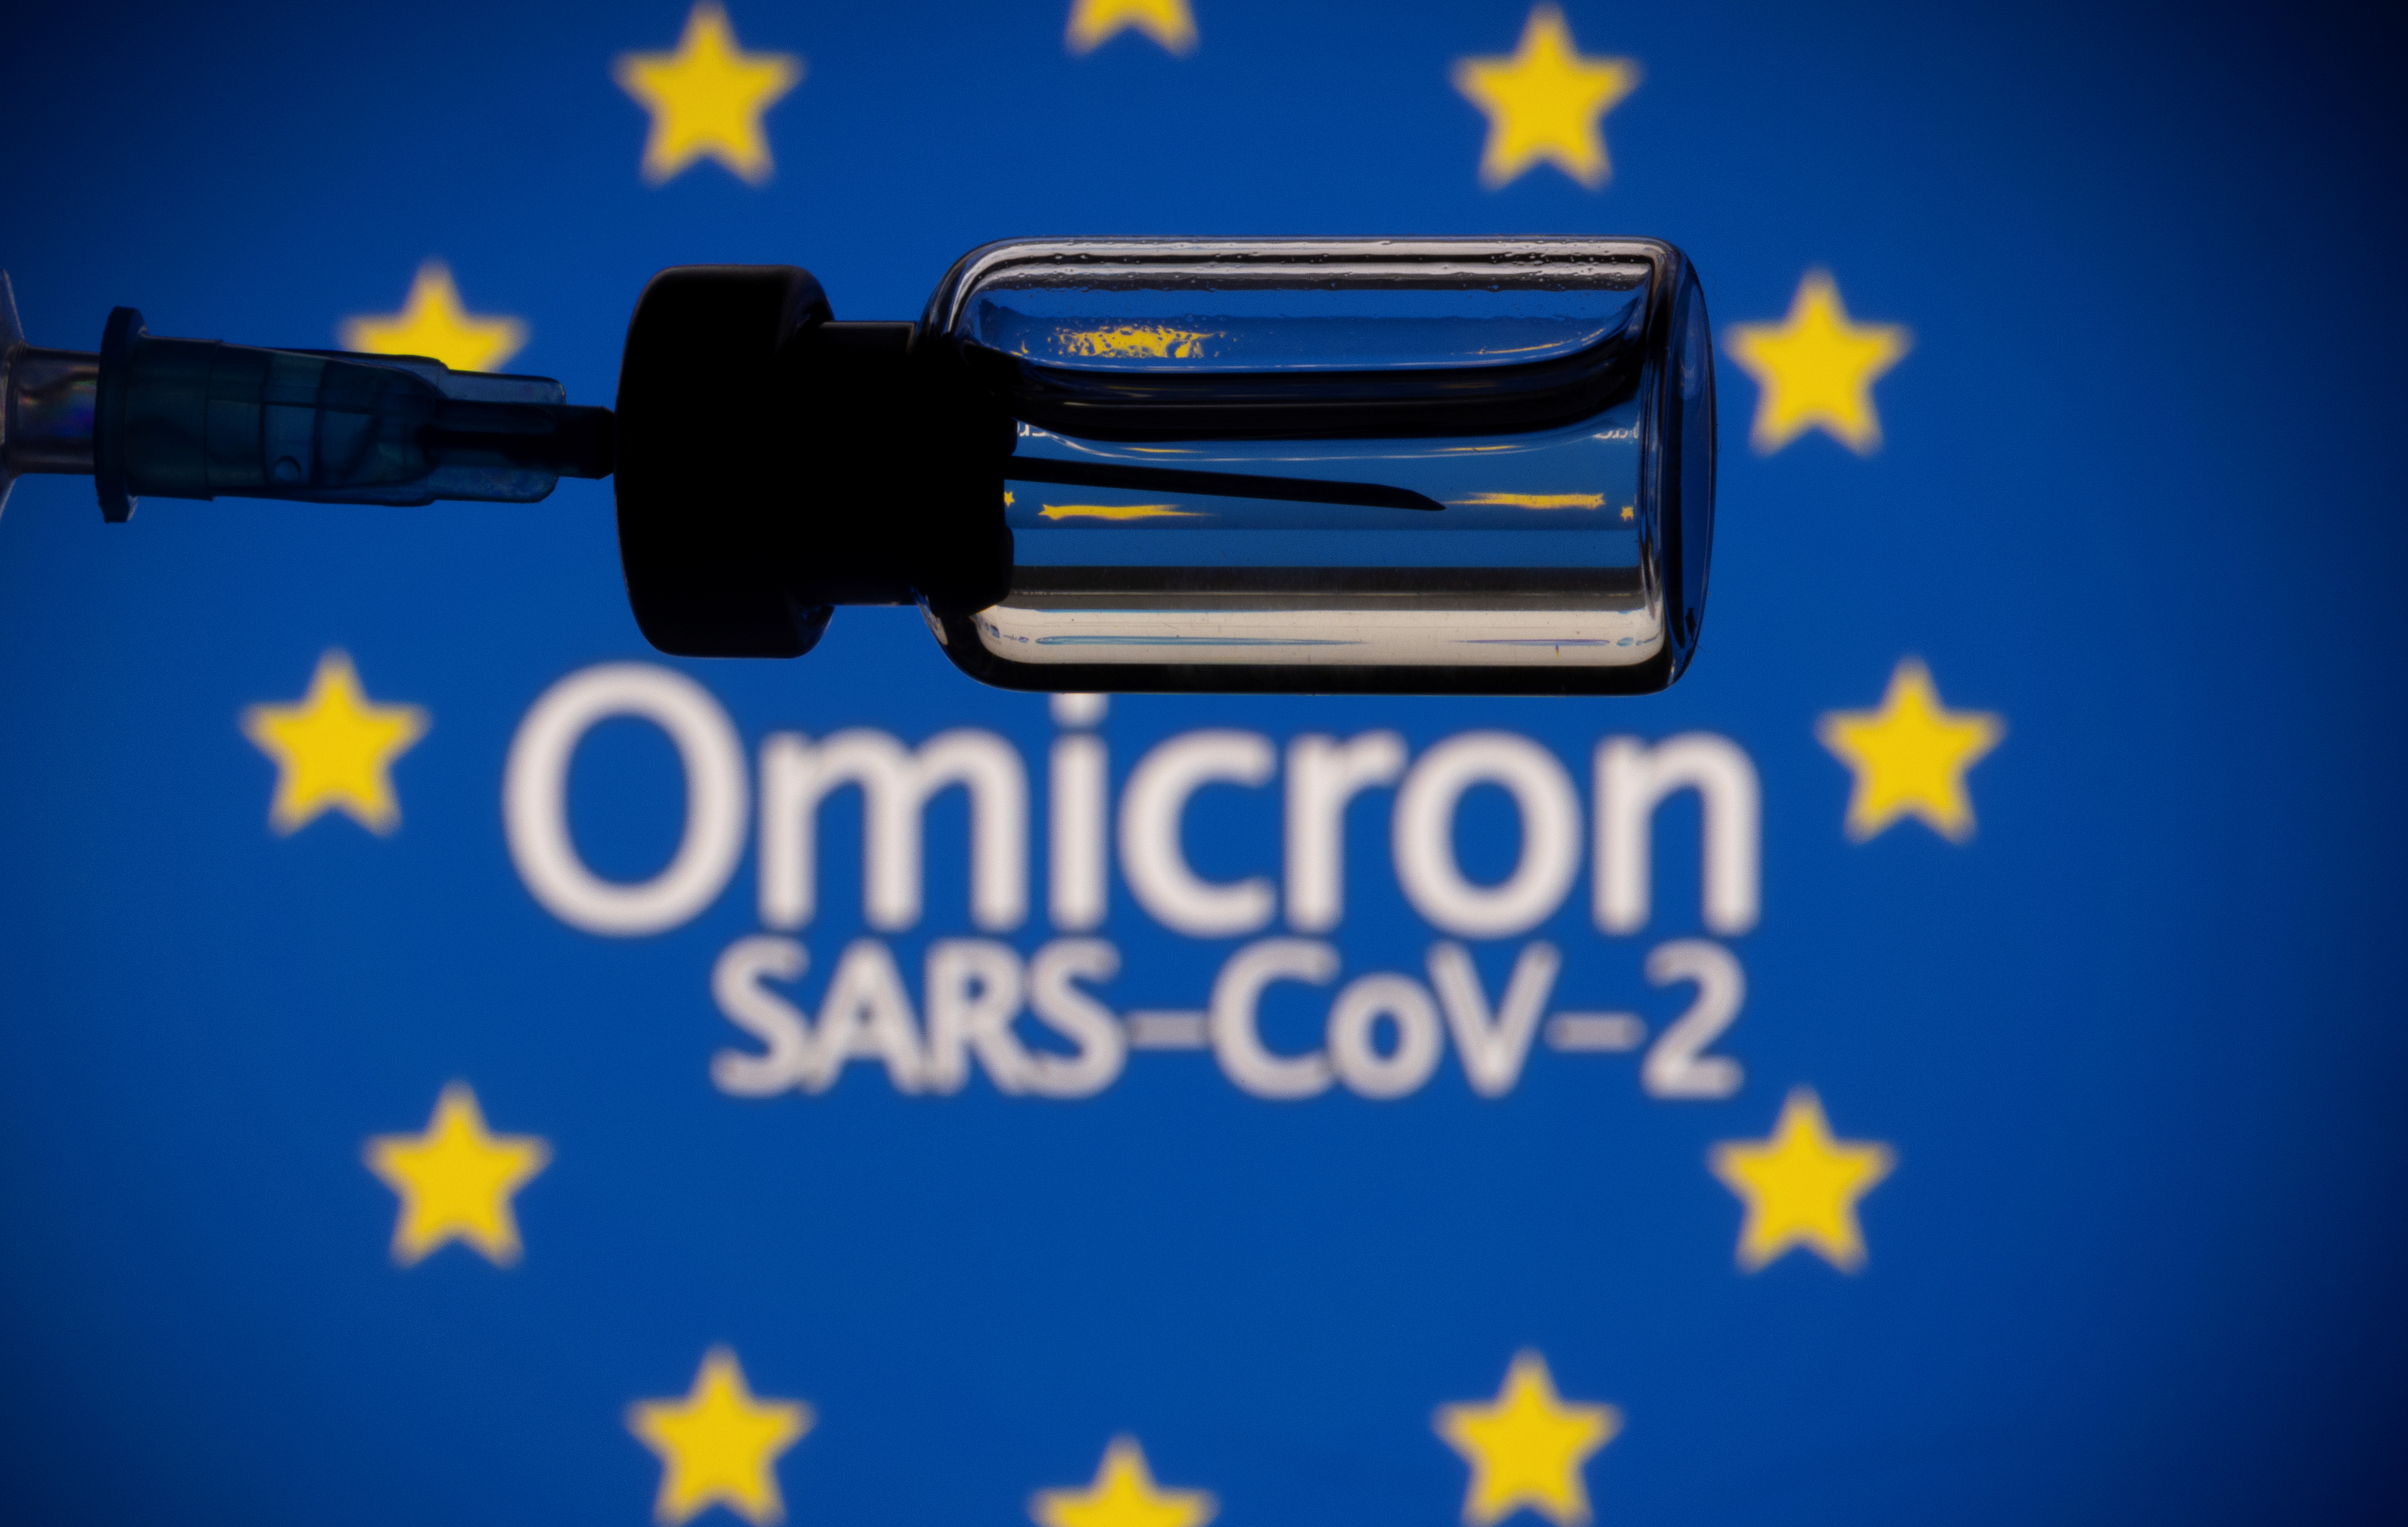 A vial and a syringe are seen in front of a displayed EU flag and words "Omicron SARS-CoV-2" in this illustration taken